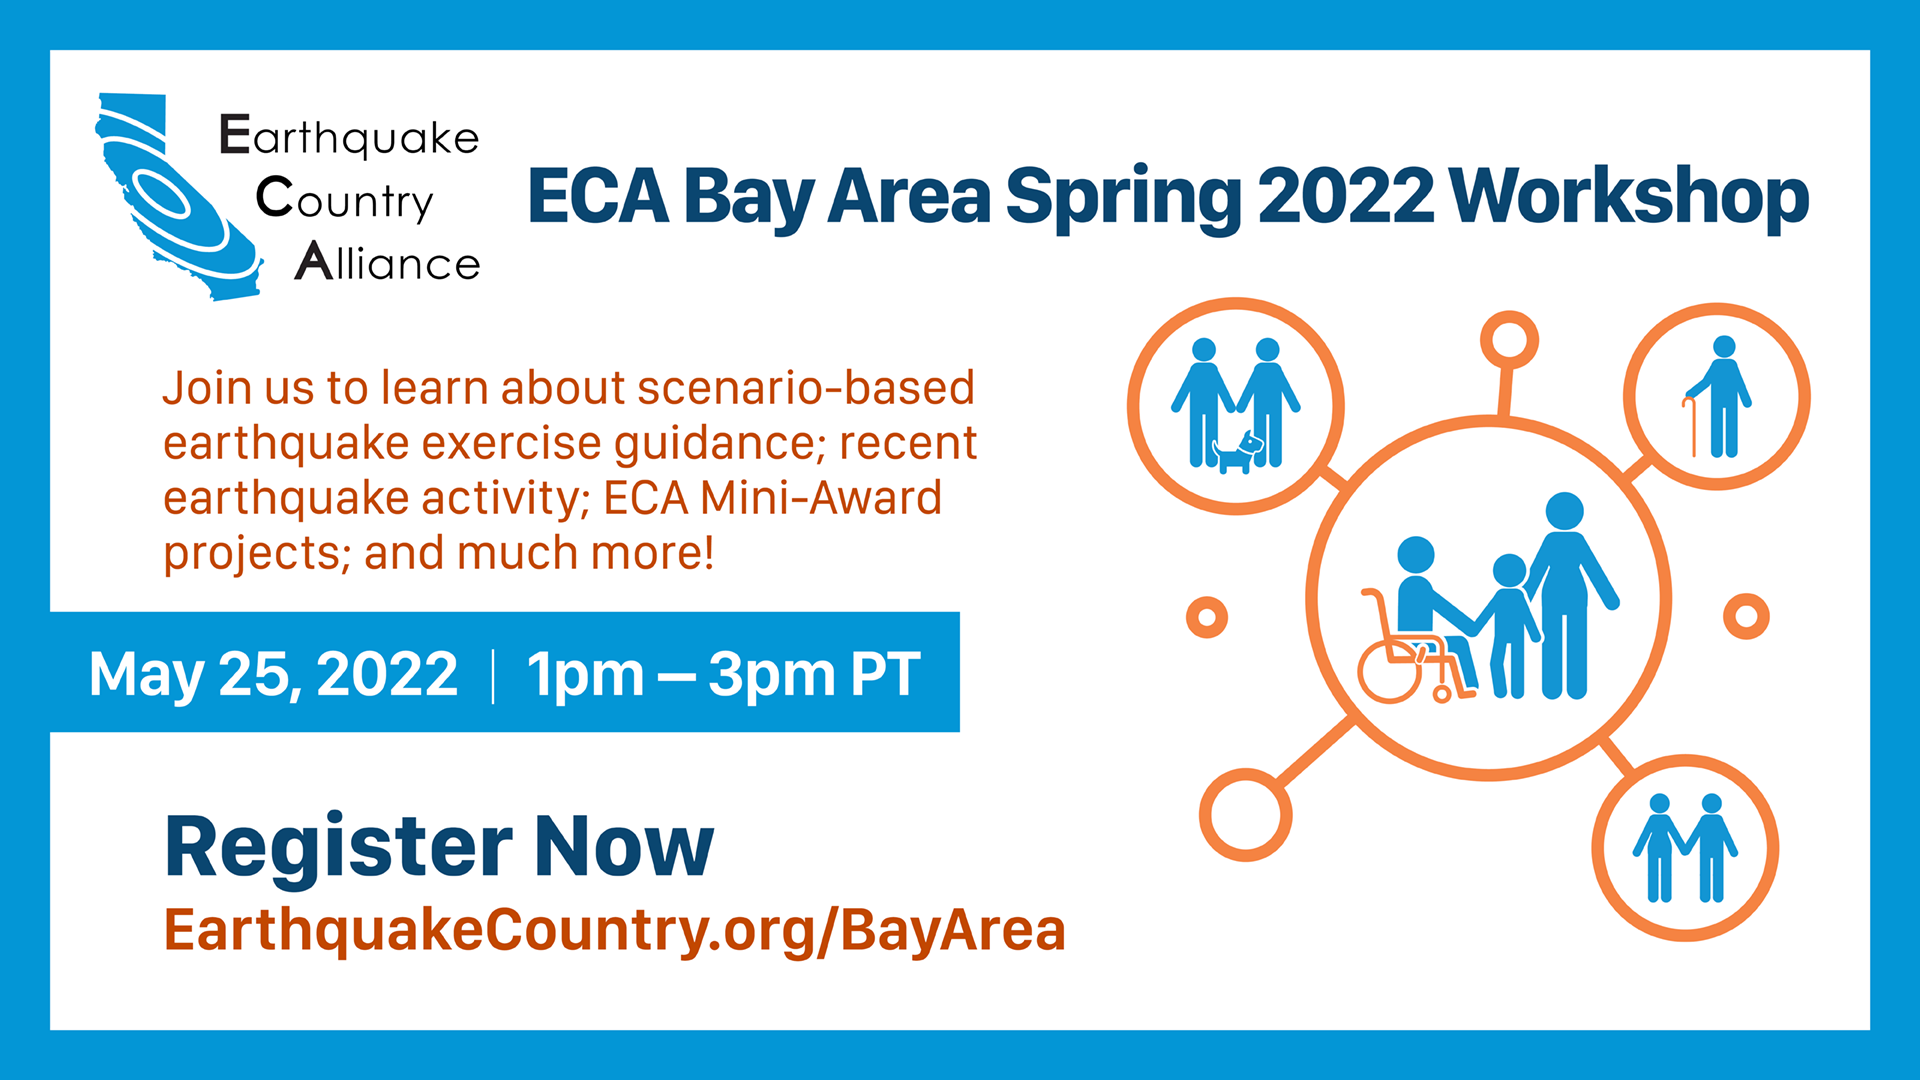 Graphic about the ECA Bay Area Spring 2022 Workshop with date (May 25) with a graphic showing interconnected groups of people.